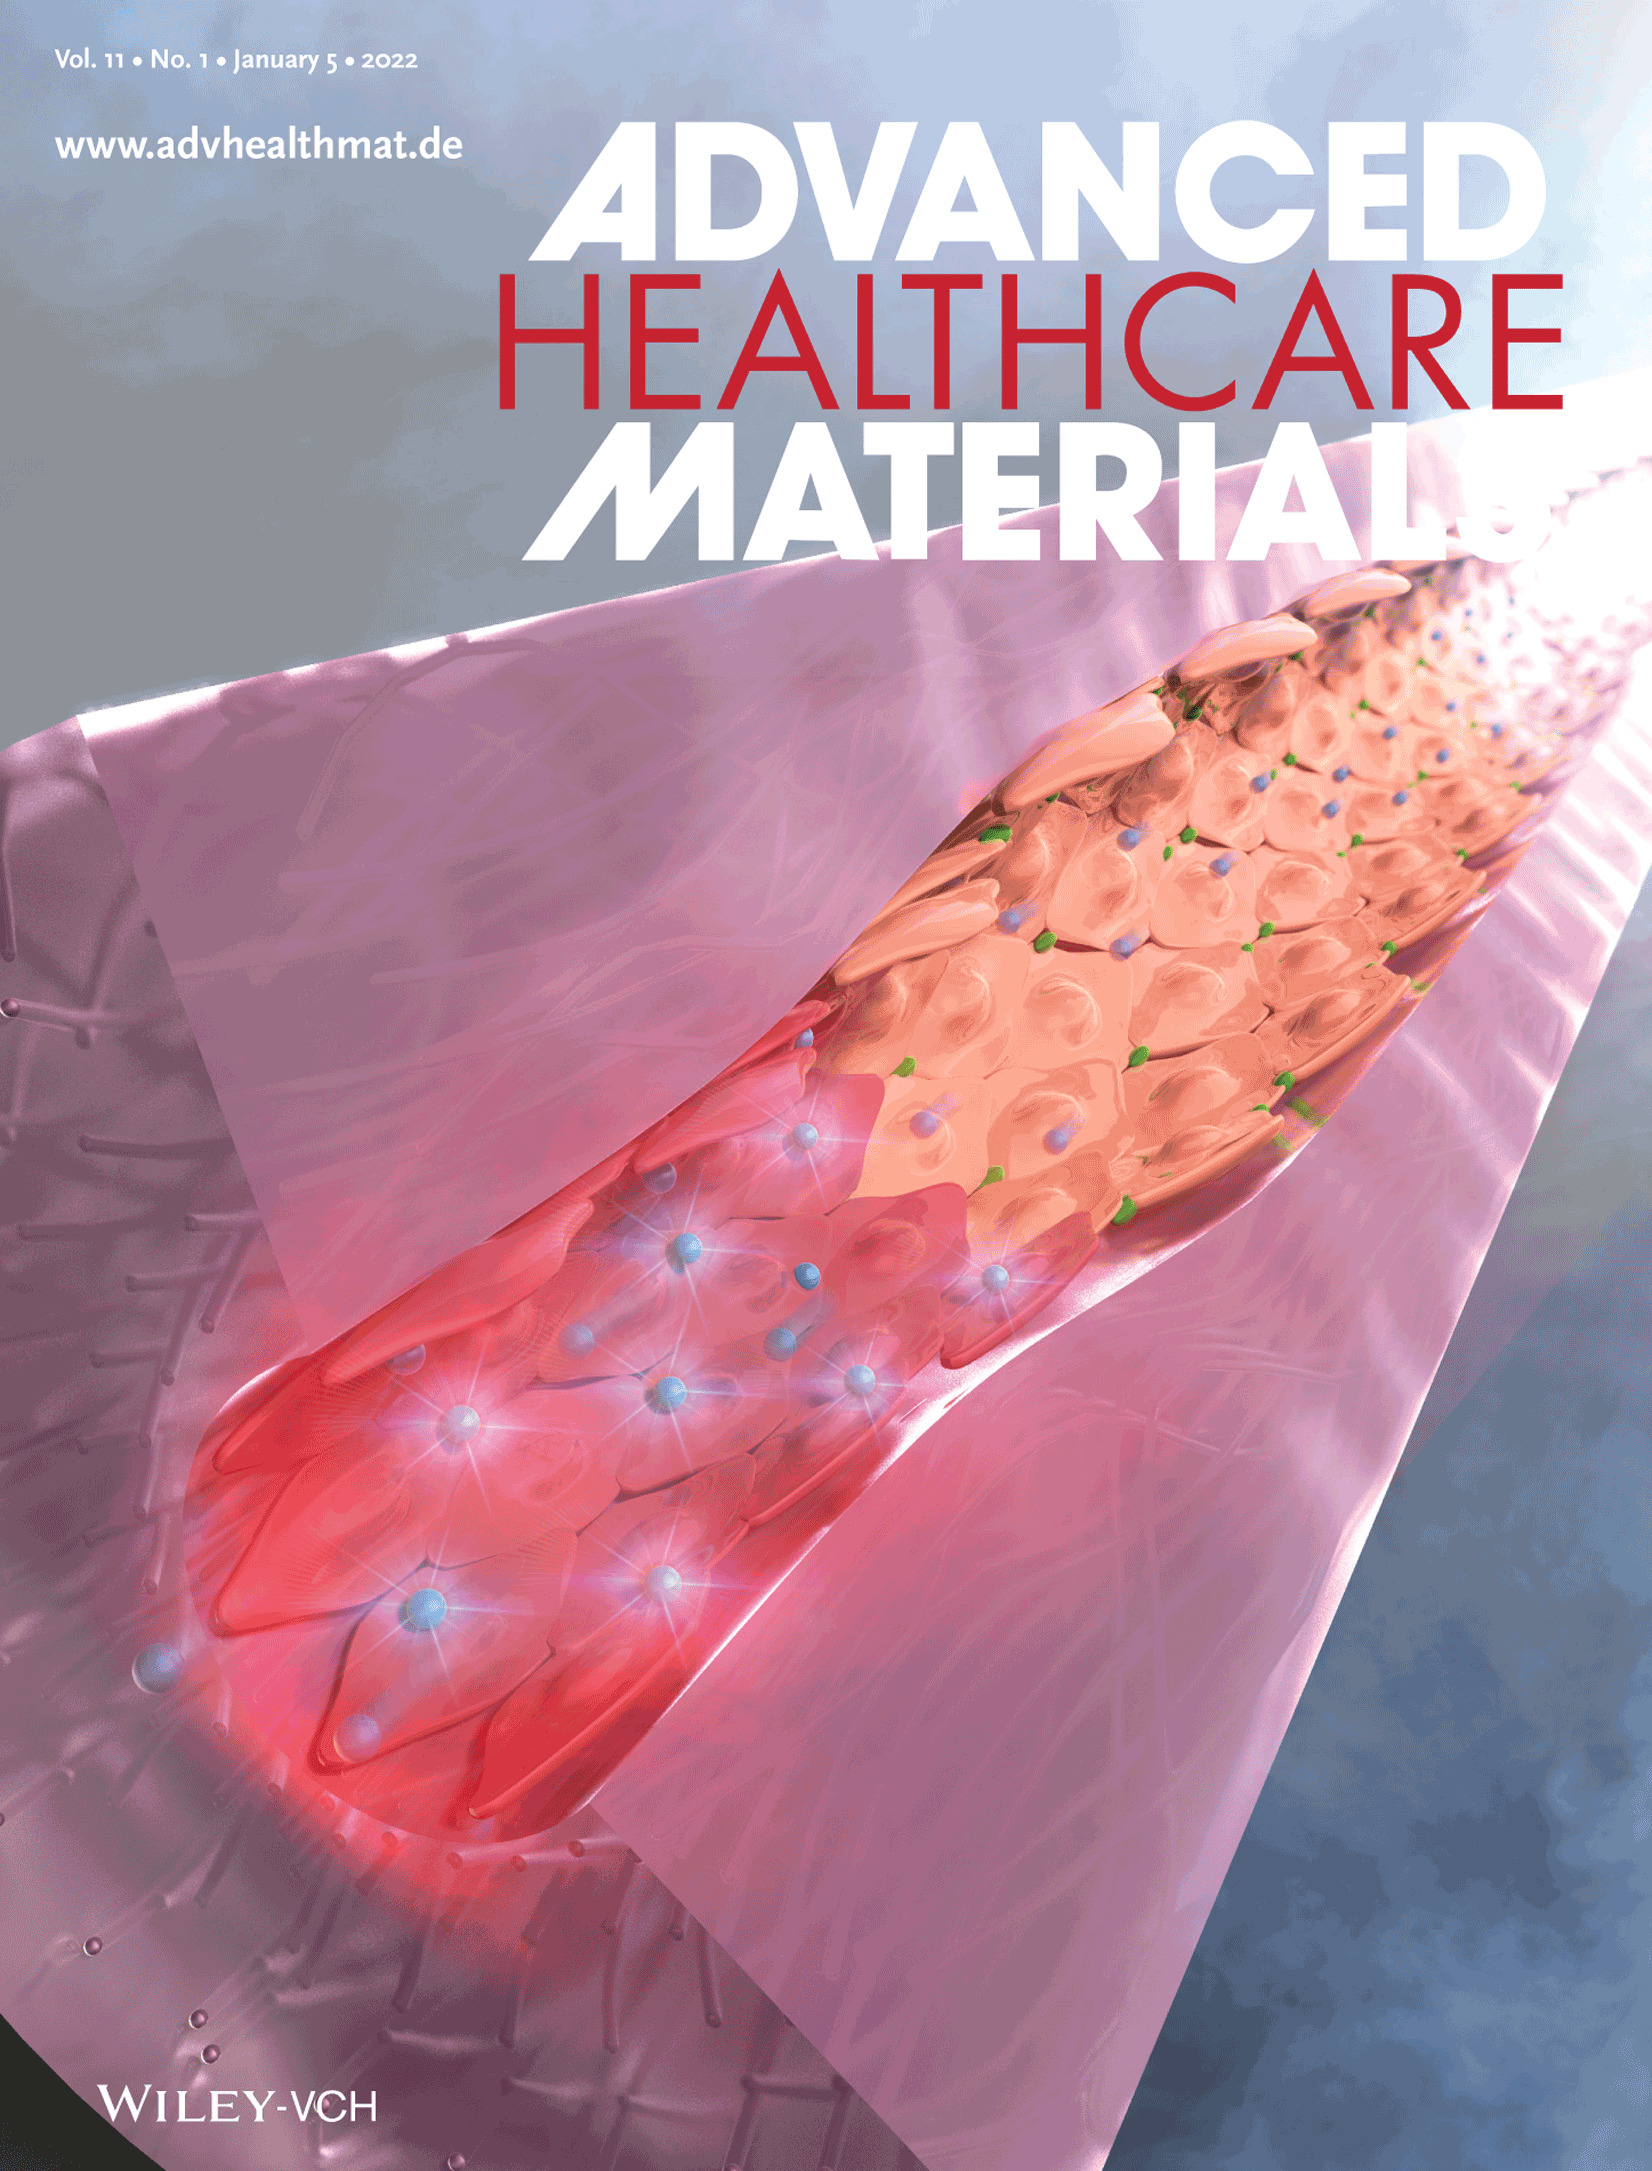 Flexibly Deformable Collagen Hydrogel Tube Reproducing Immunological Tissue Deformation of Blood Vessels as a Pharmacokinetic Testing Model (Adv. Healthcare Mater. 1/2022)